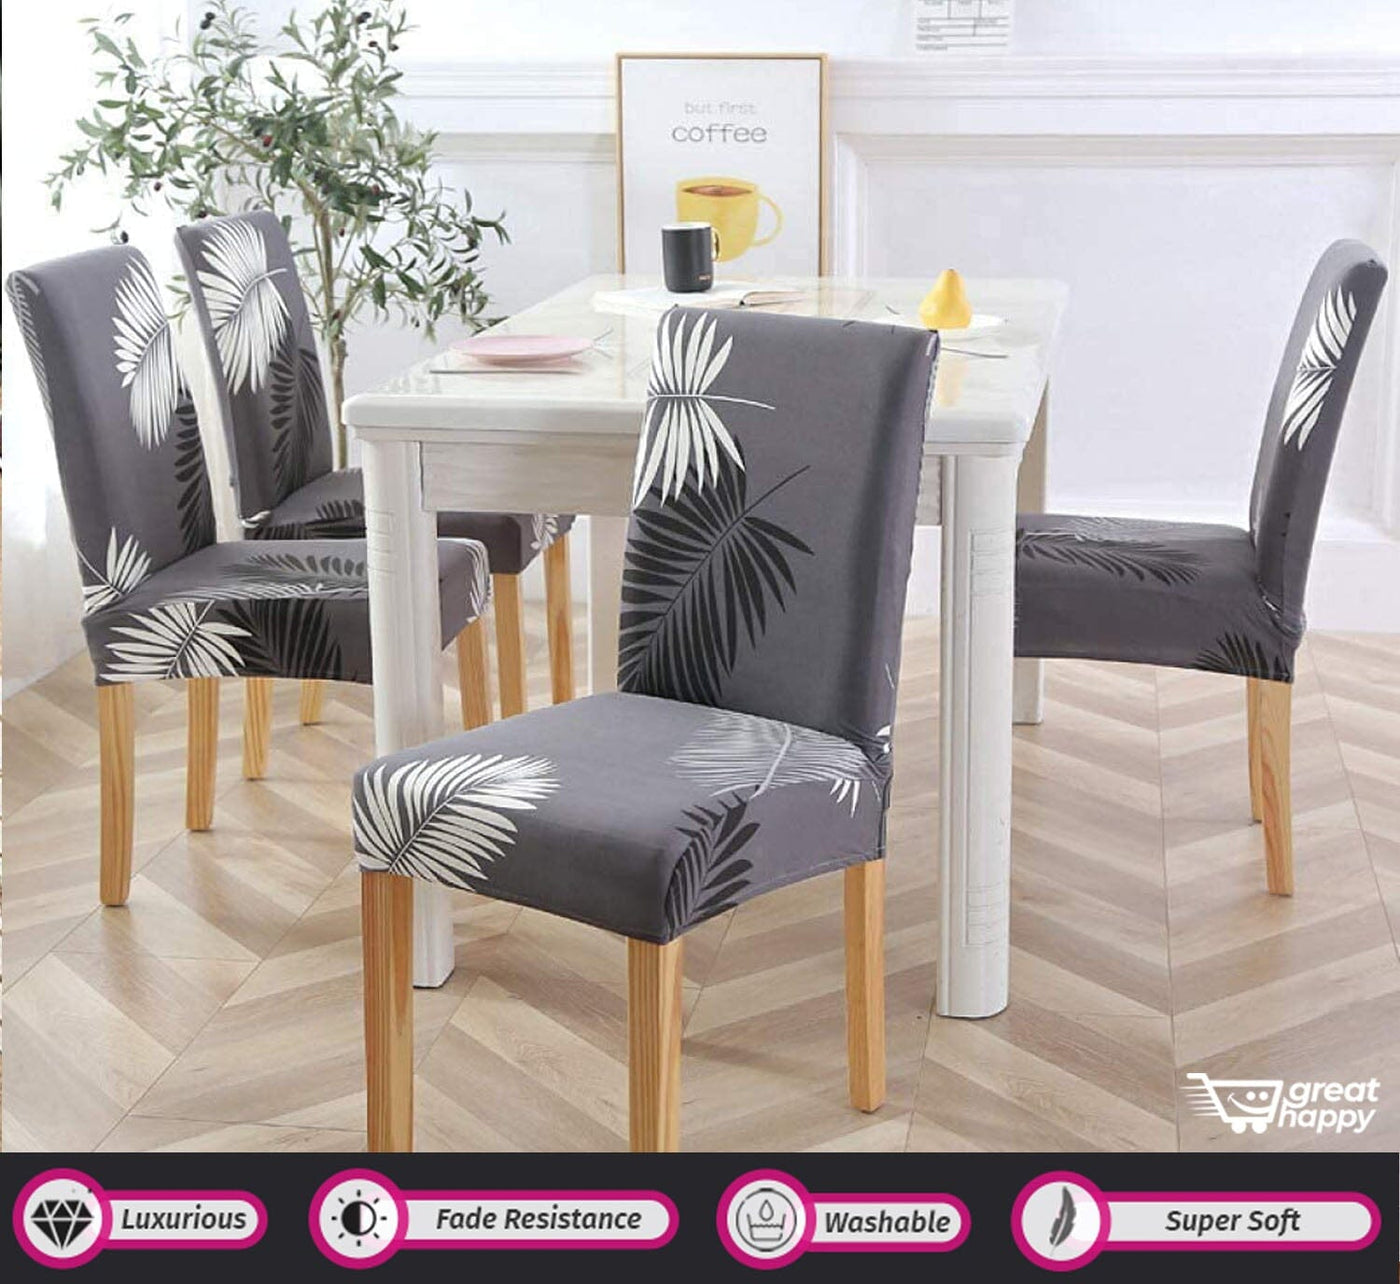 Premium Chair Cover - Stretchable & Elastic Fitted Great Happy IN Dark Grey Fern 2 PCS - ₹799 